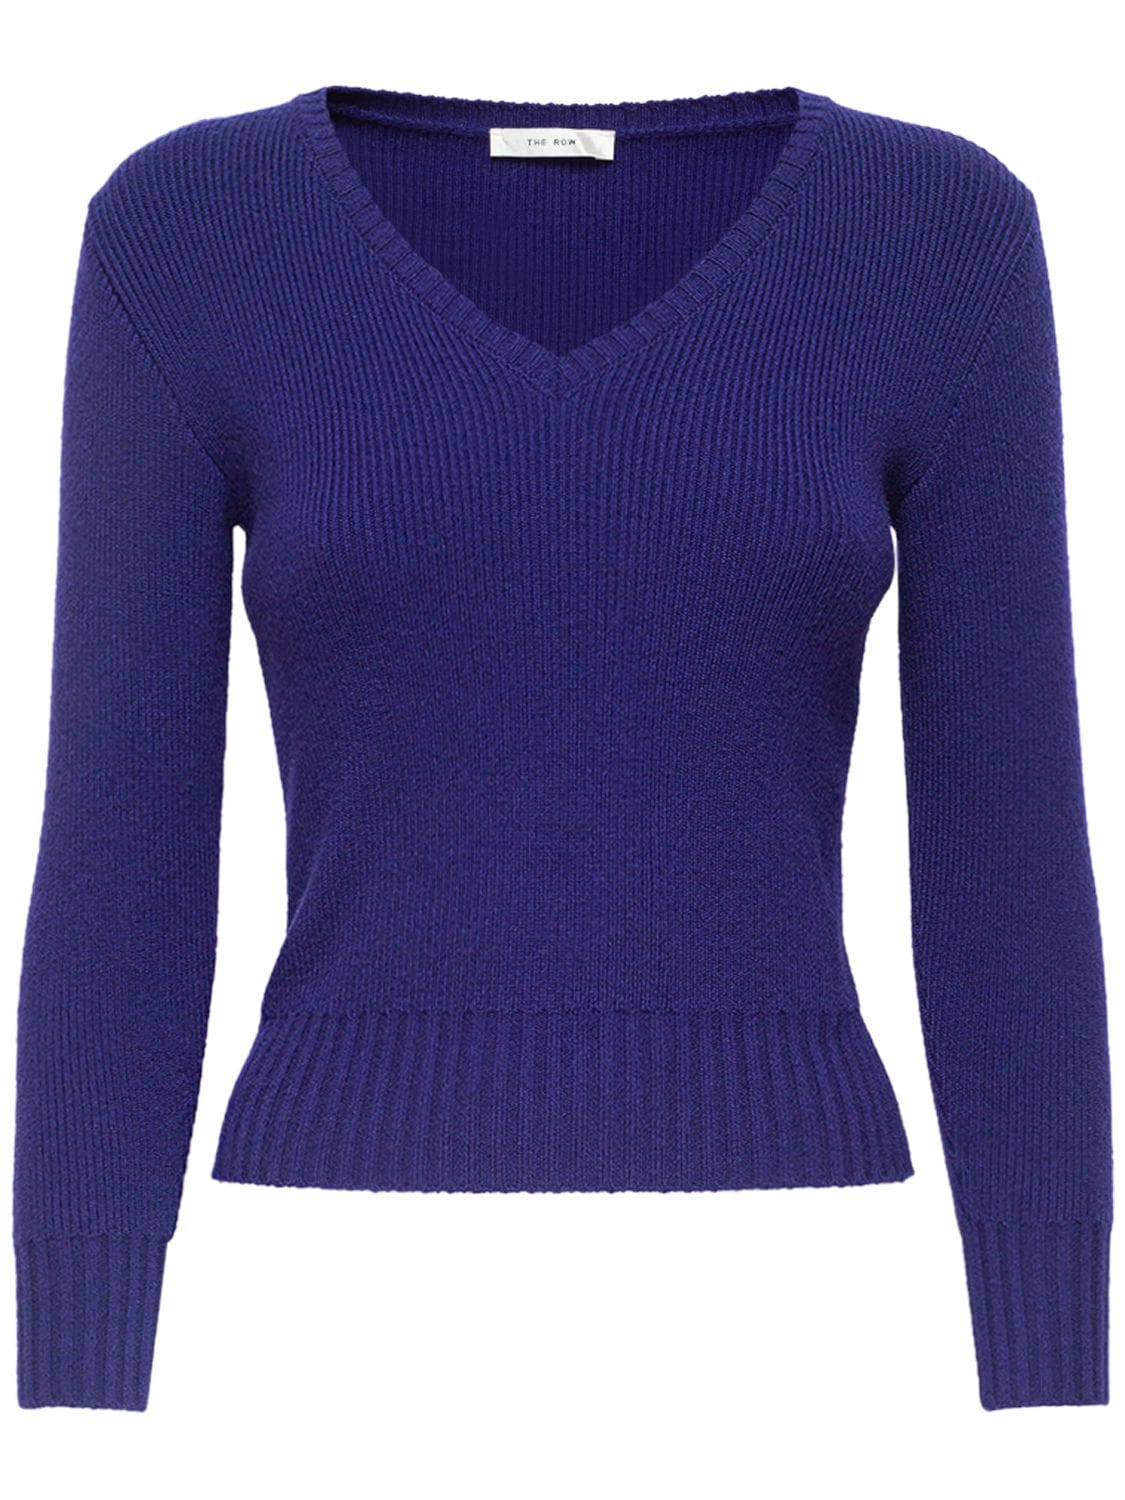 Image of Cael Cashmere Blend Knit Sweater